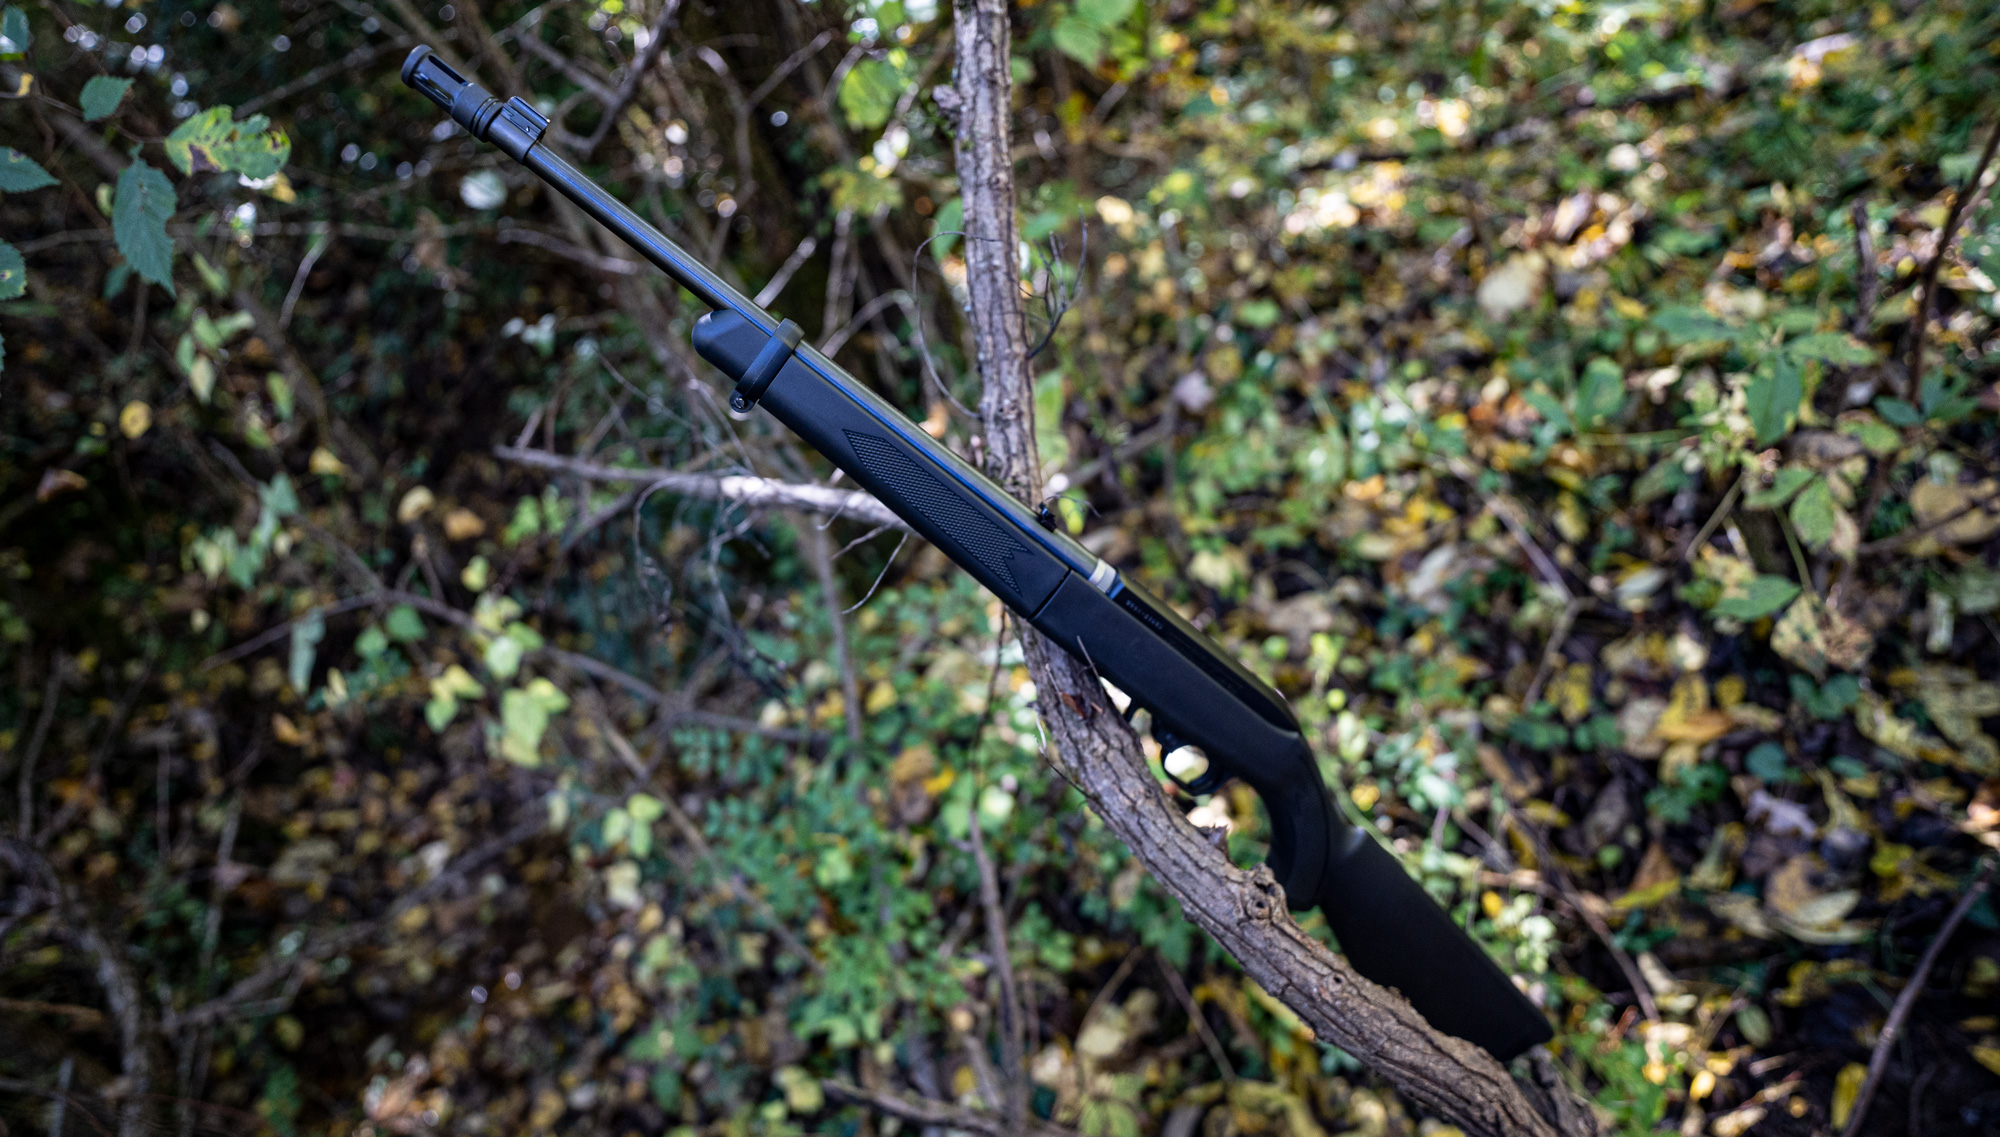 The Ruger 10-22, a very popular first rifle option for American shooters